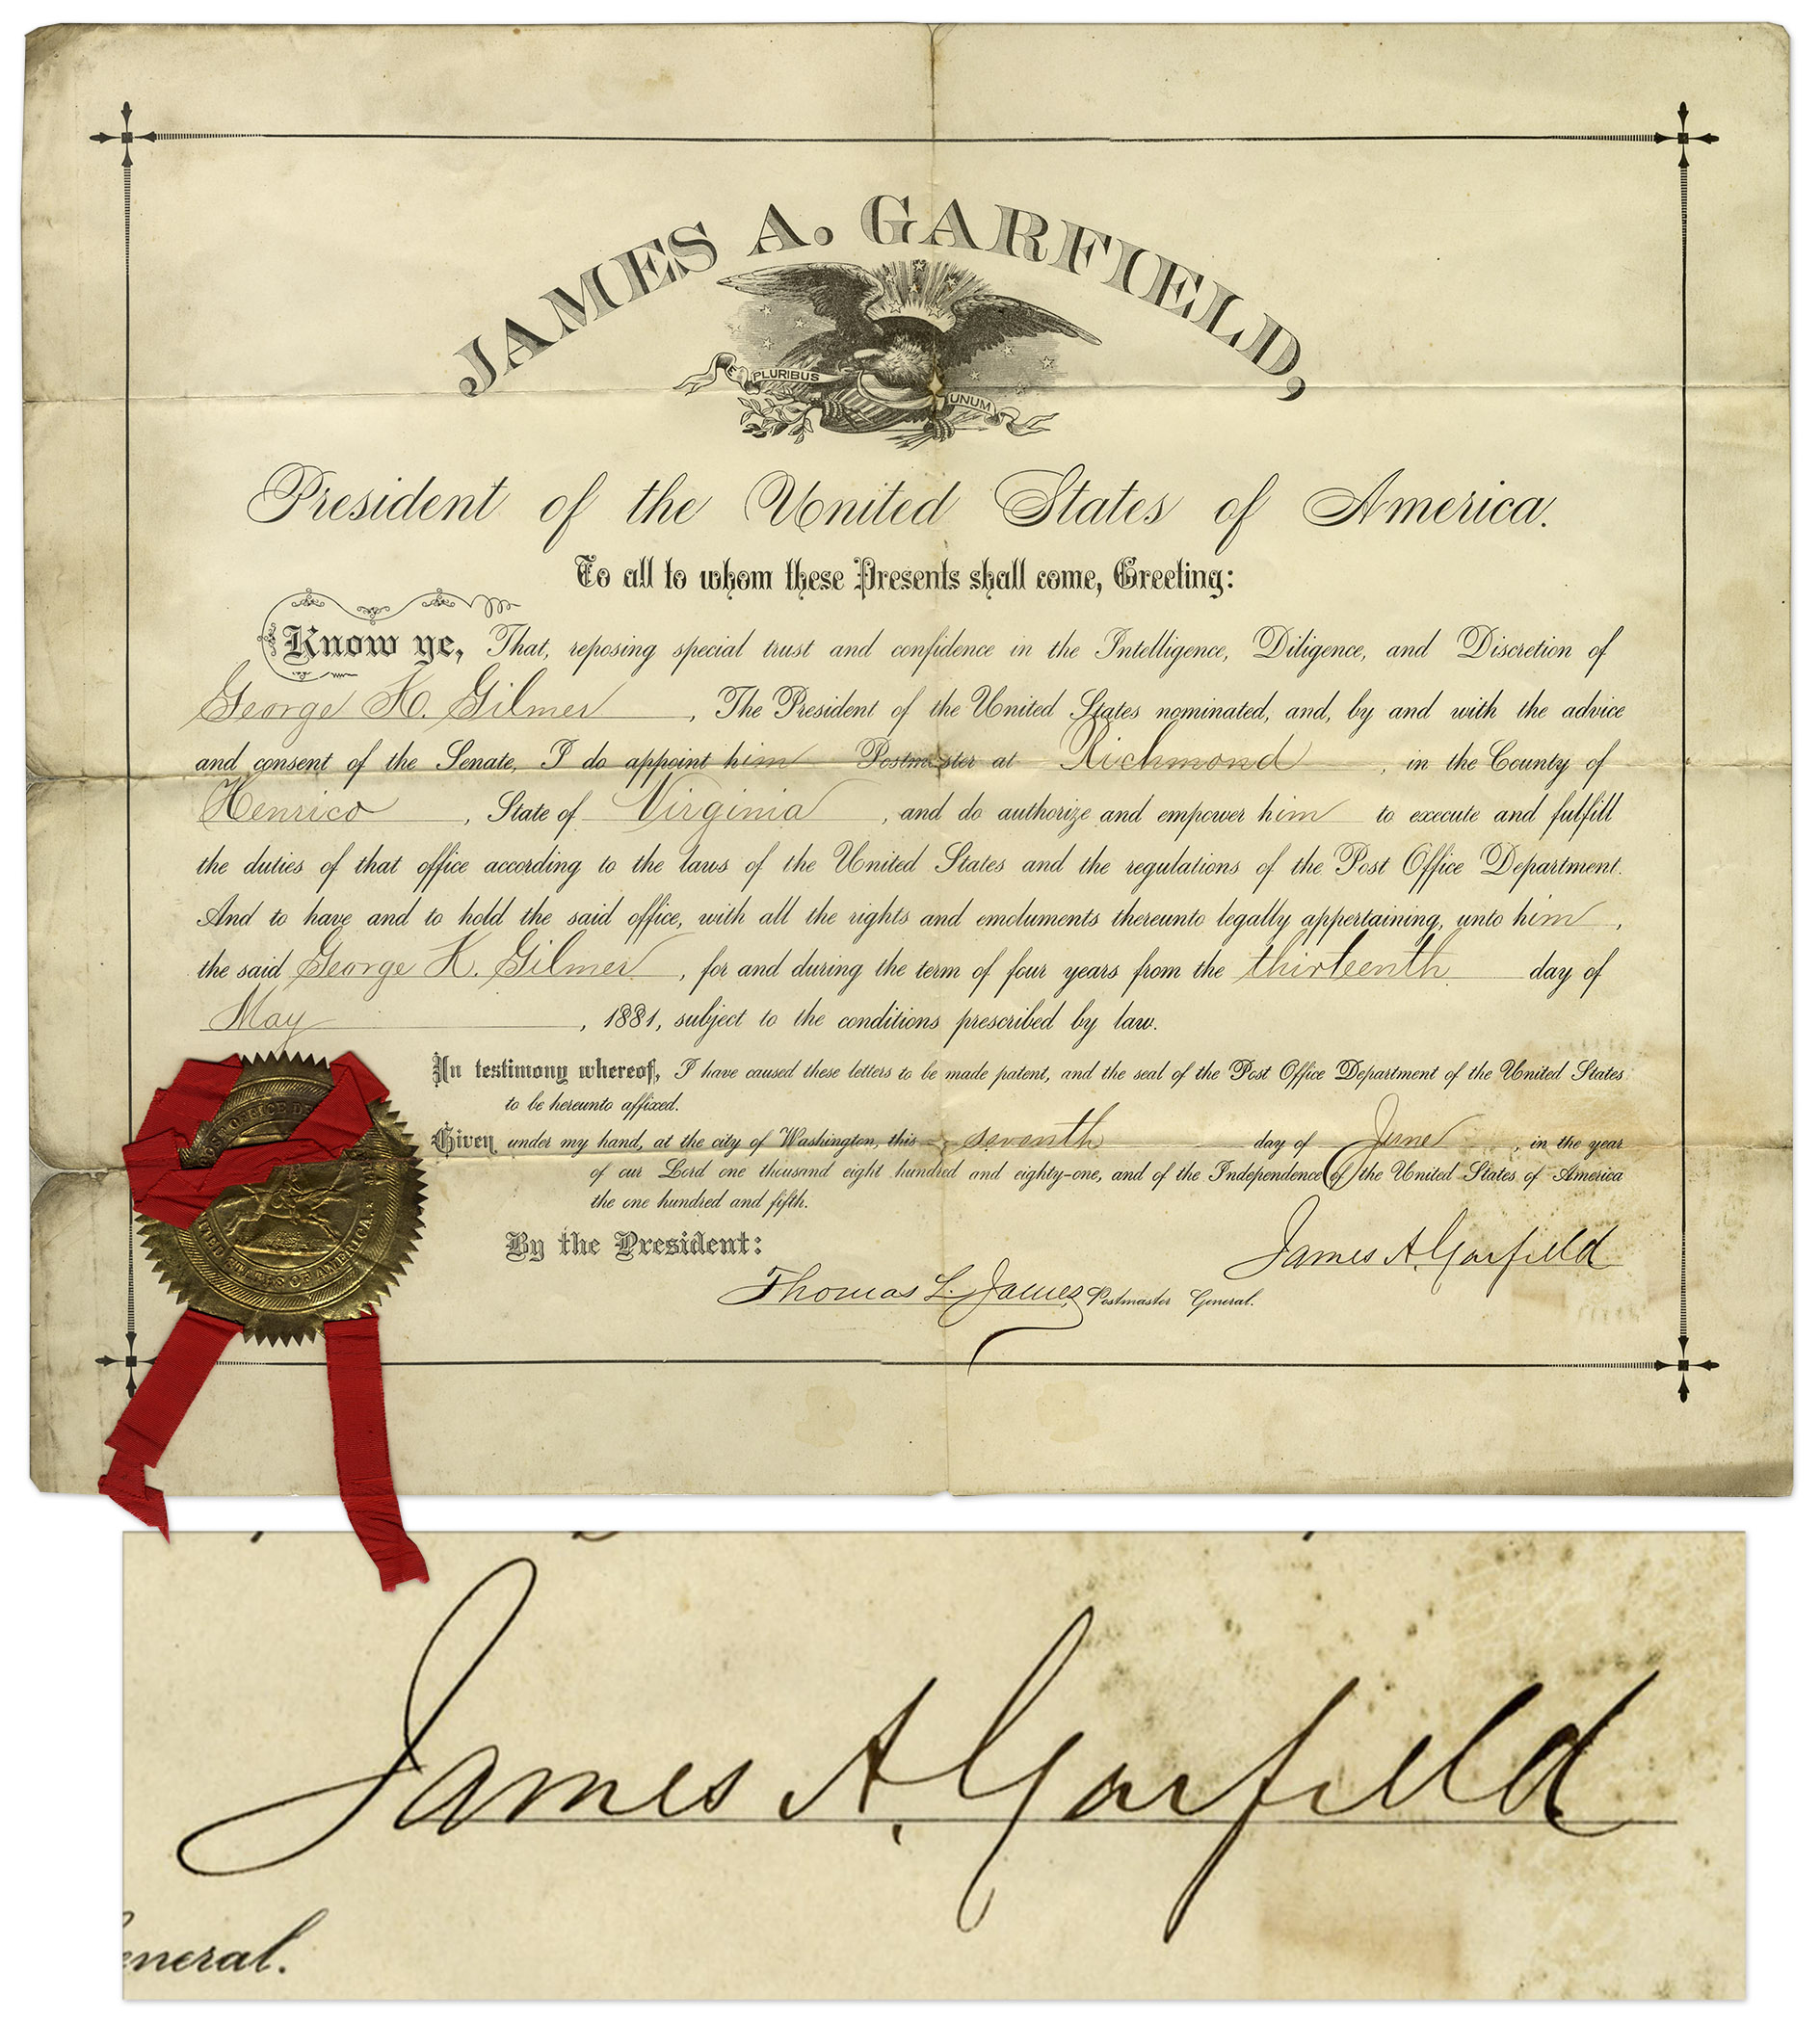 Scarce James Garfield Document Signed as President -- From 7 June 1881 James Garfield document